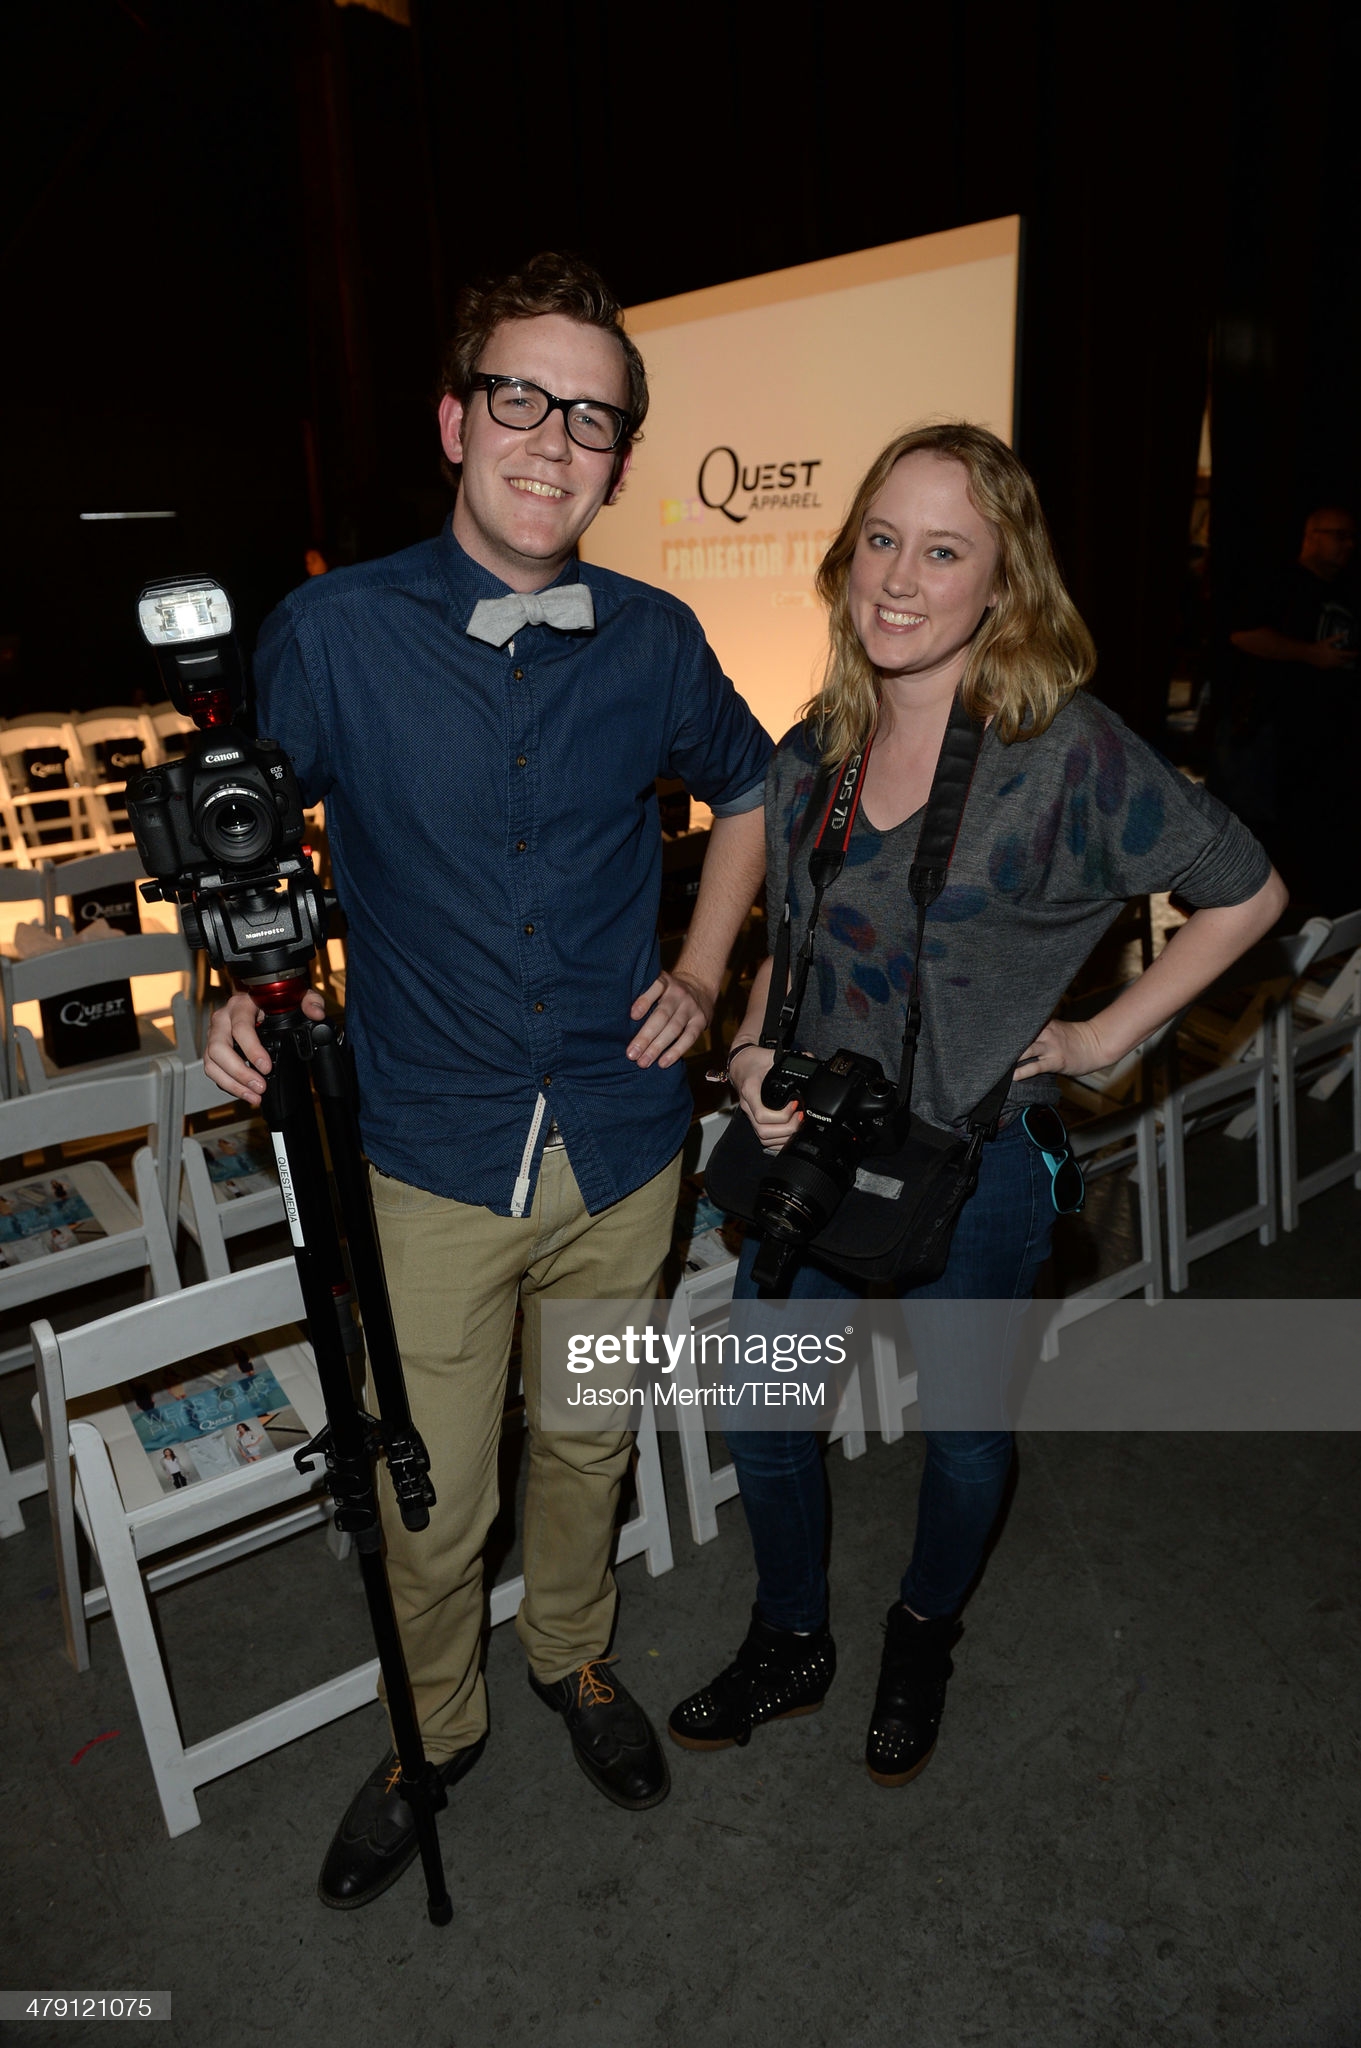 gettyimages-479121075-2048×2048-1